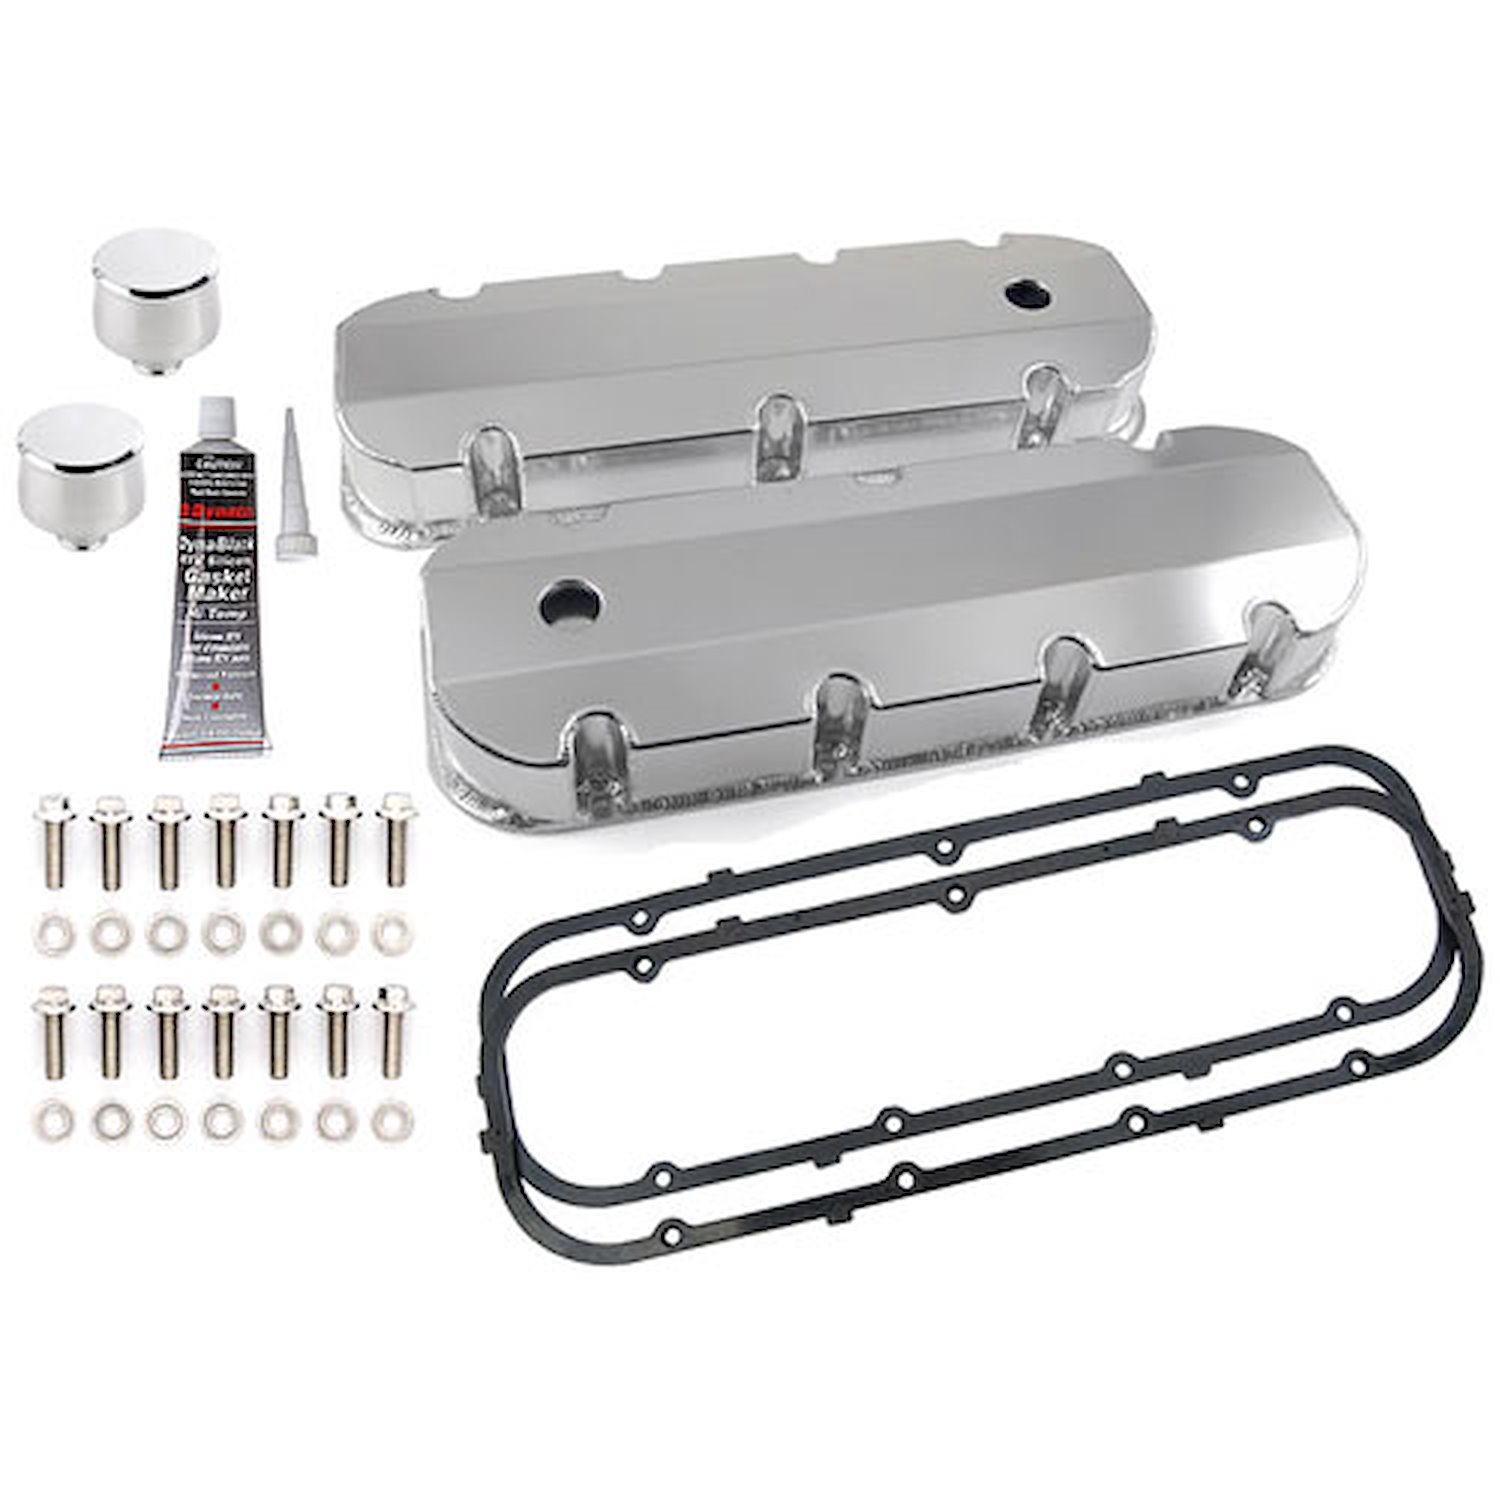 Fabricated Aluminum Valve Cover Kit Big Block Chevy 454 Includes: